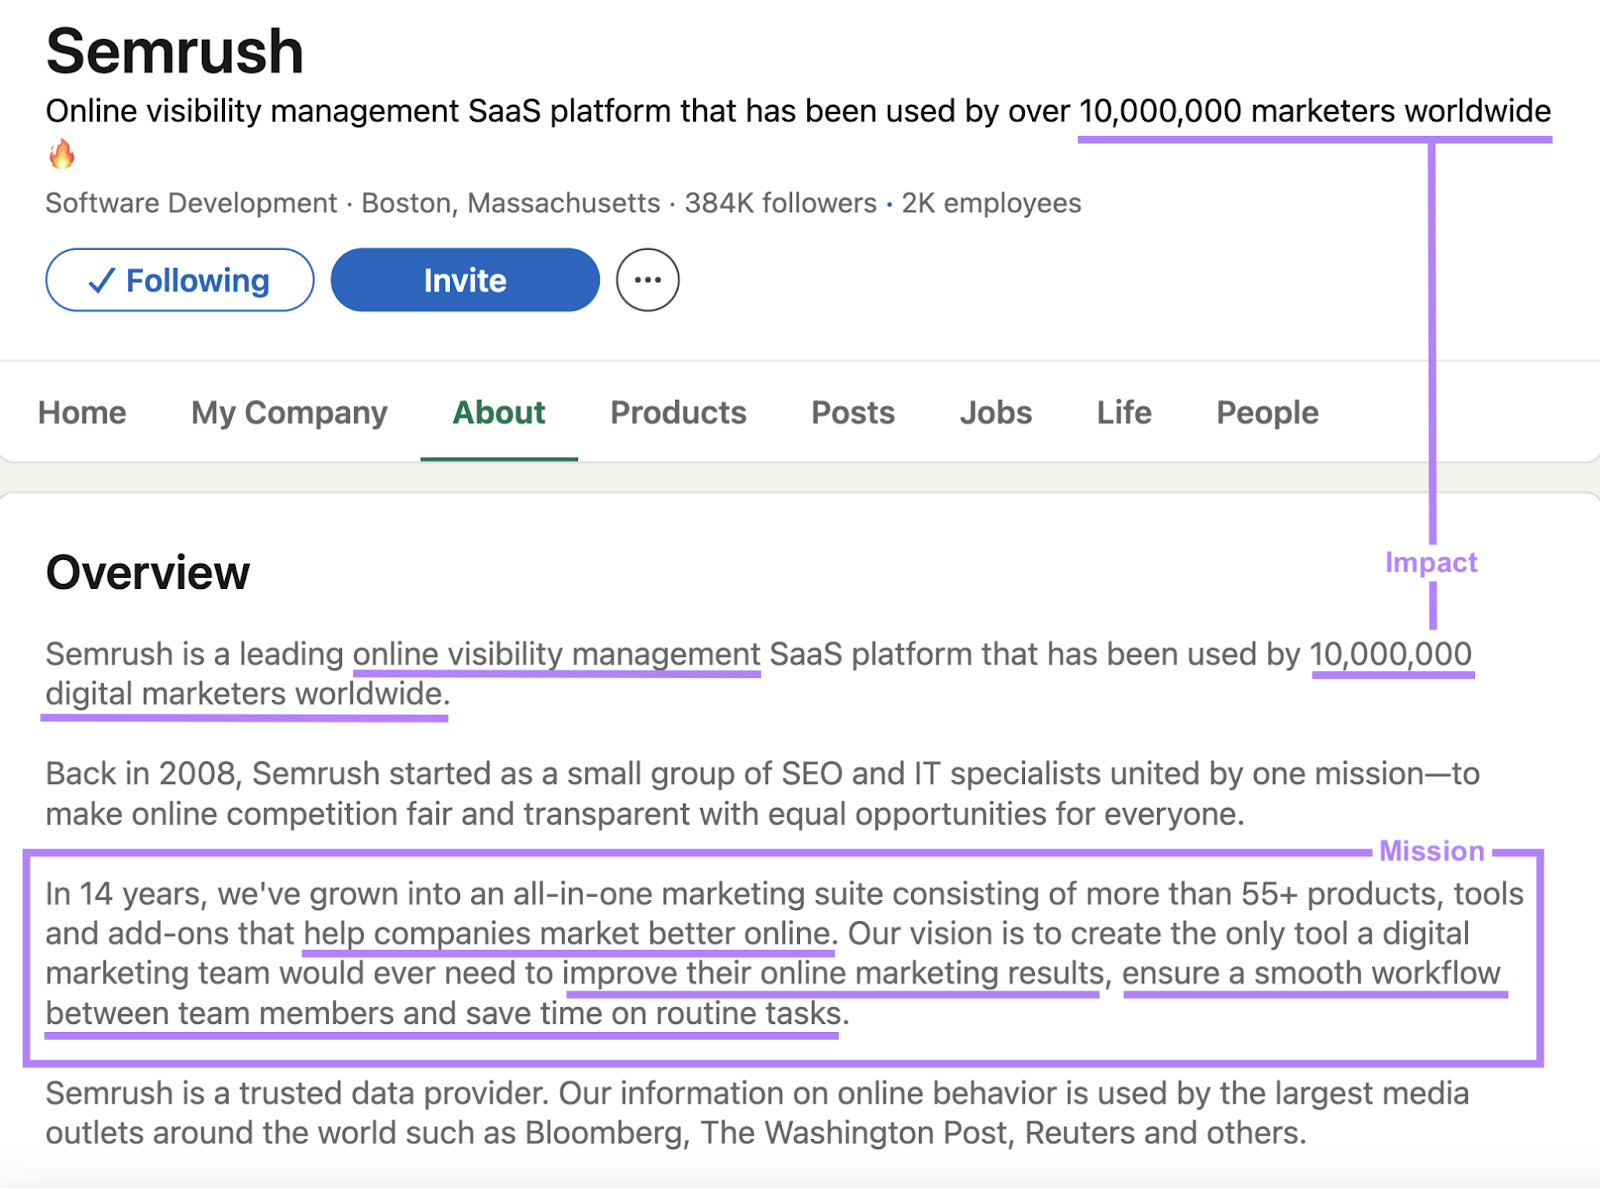 Semrush's LinkedIn headline and “About” section